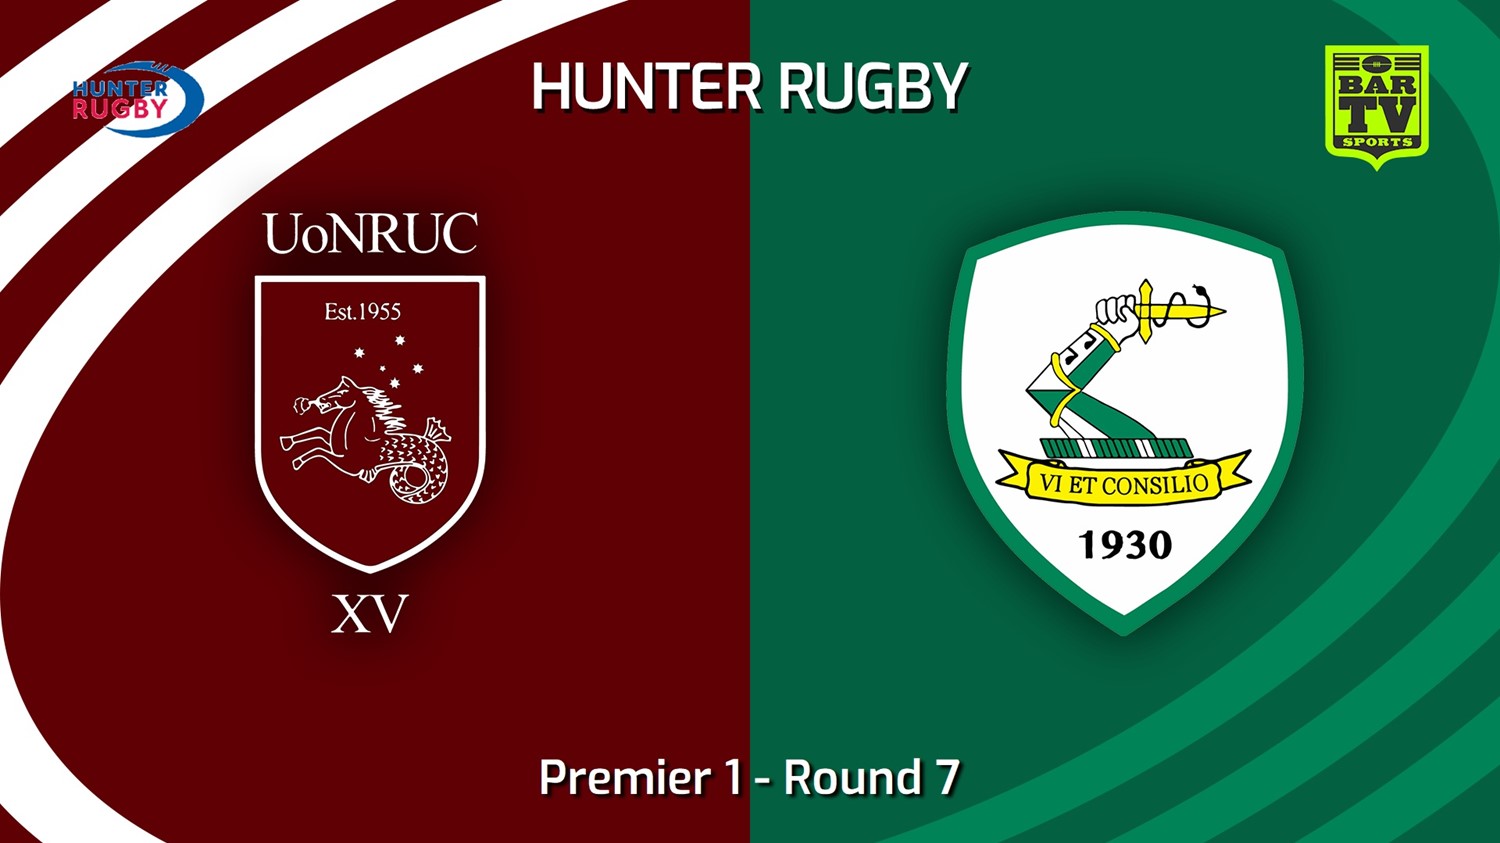 240525-video-Hunter Rugby Round 7 - Premier 1 - University Of Newcastle v Merewether Carlton Minigame Slate Image